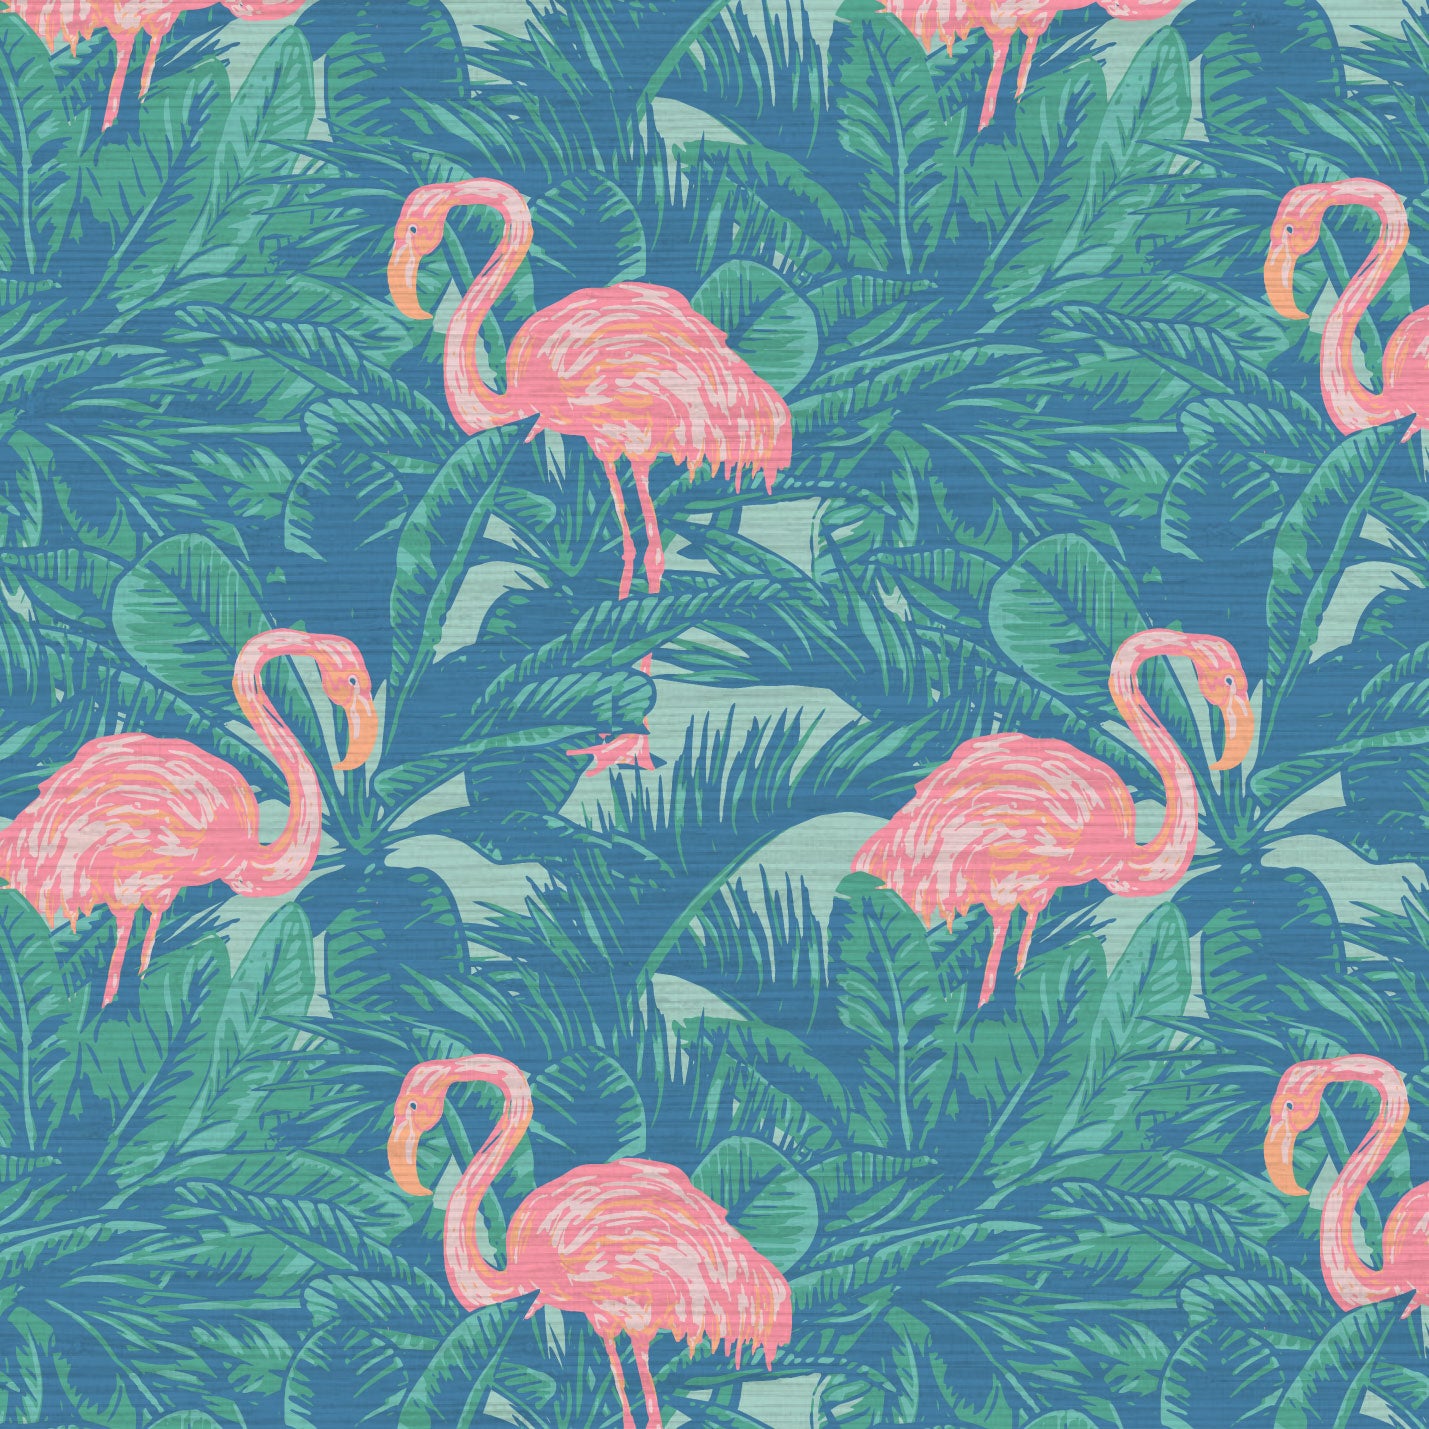 Grasscloth wallpaper Natural Textured Eco-Friendly Non-toxic High-quality Sustainable Interior Design Bold Custom Tailor-made Retro chic Grand millennial Maximalism Traditional Dopamine decor Tropical Jungle Coastal Garden Seaside Seashore Waterfront Retreat Relaxed beach vibes Beach cottage Shoreline Oceanfront Nautical Cabana preppy flamingo pink palm leaf green